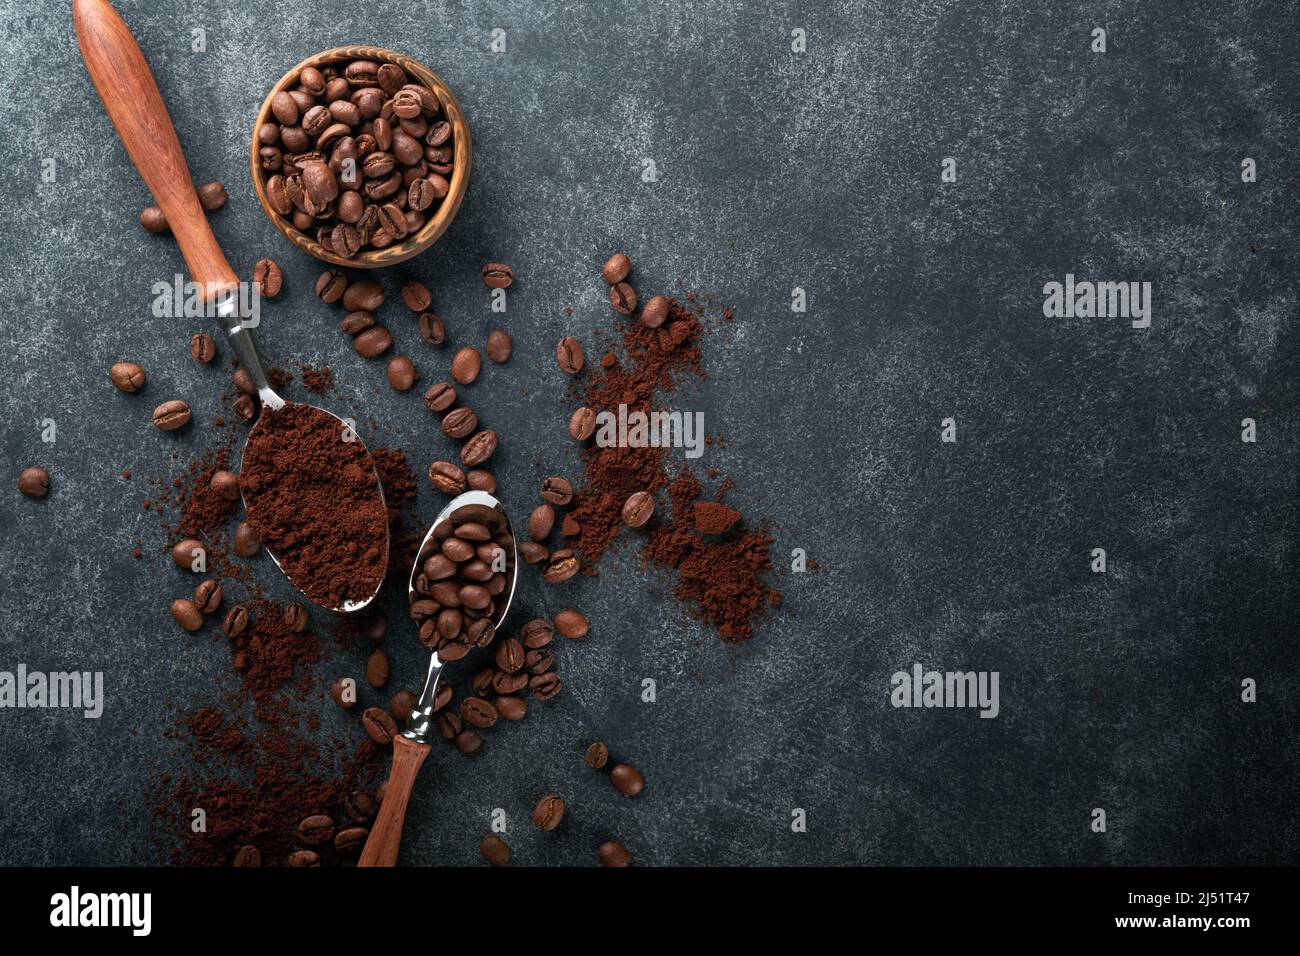 Coffee beans background. Roasted coffee concept with differents types of beans and cinnamon sticks on dark black stone background. Top view. Coffee co Stock Photo